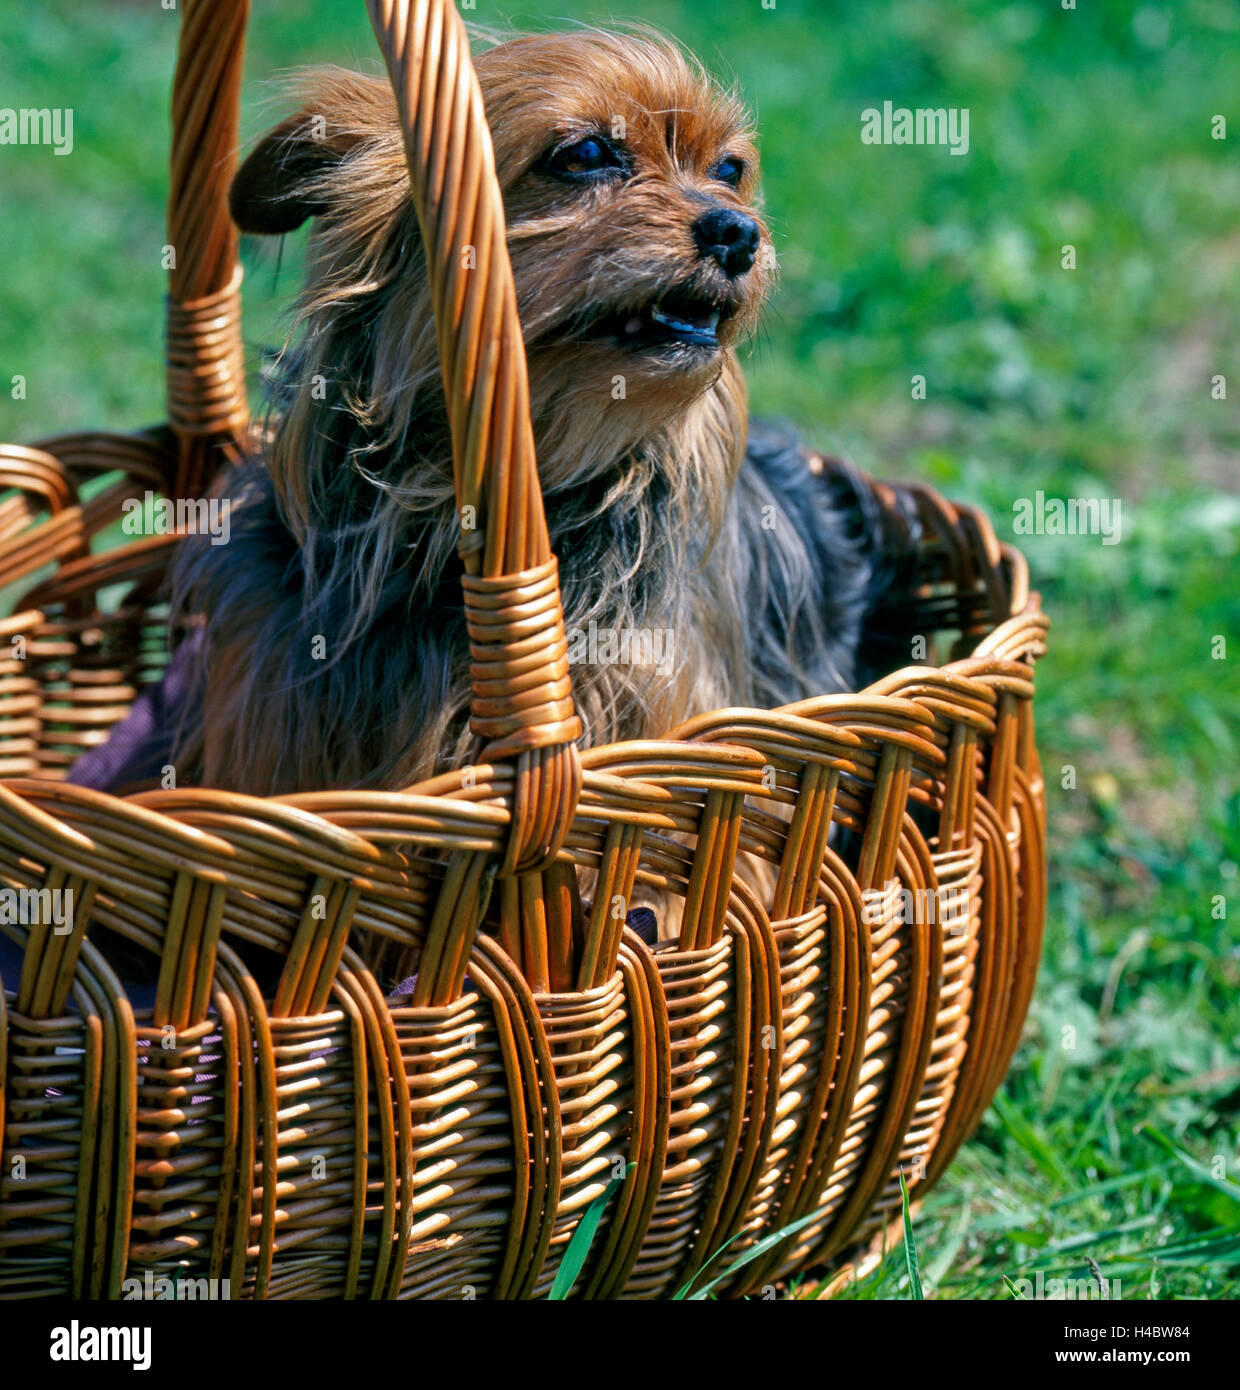 Yorkshire terrier in the basket, Stock Photo